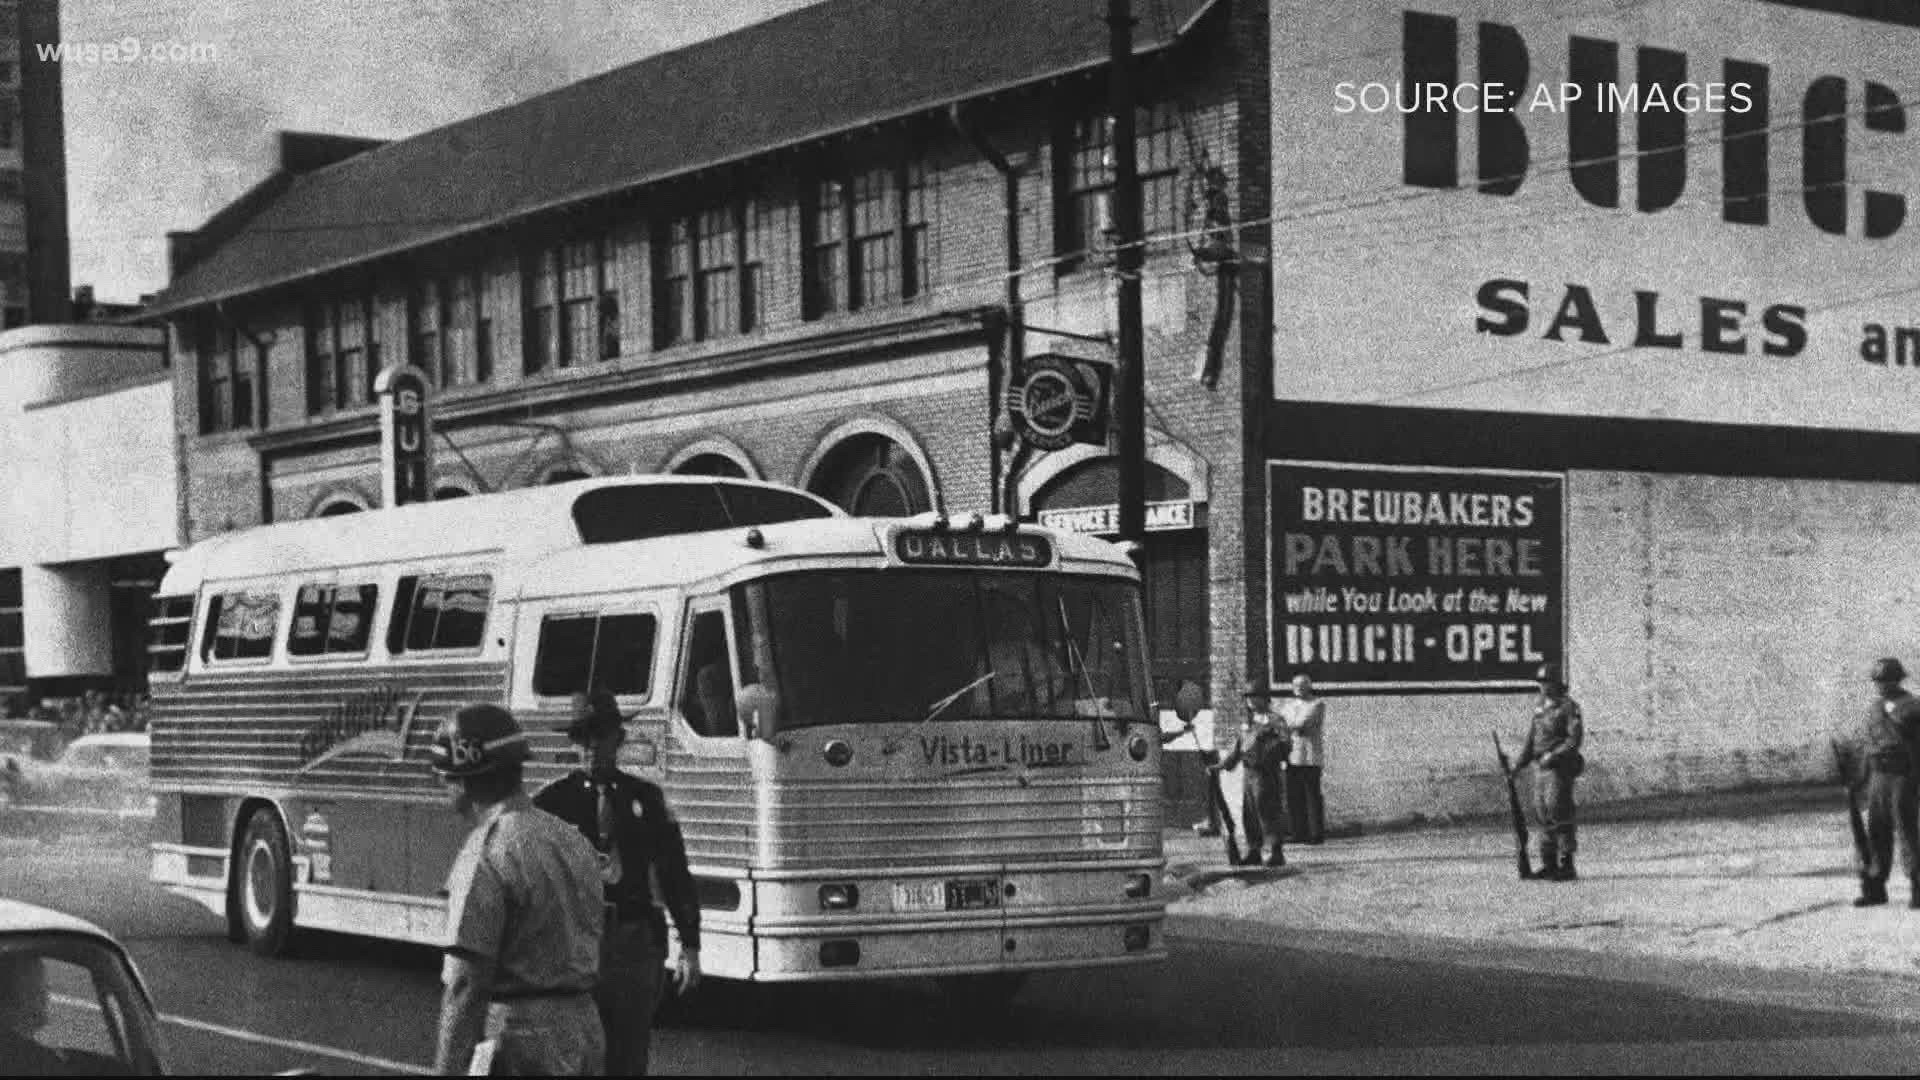 Decades after being on the front lines of the civil rights movement, Jim Zwerg shares what it was like sharing a seat with John Lewis on the Freedom Rides.